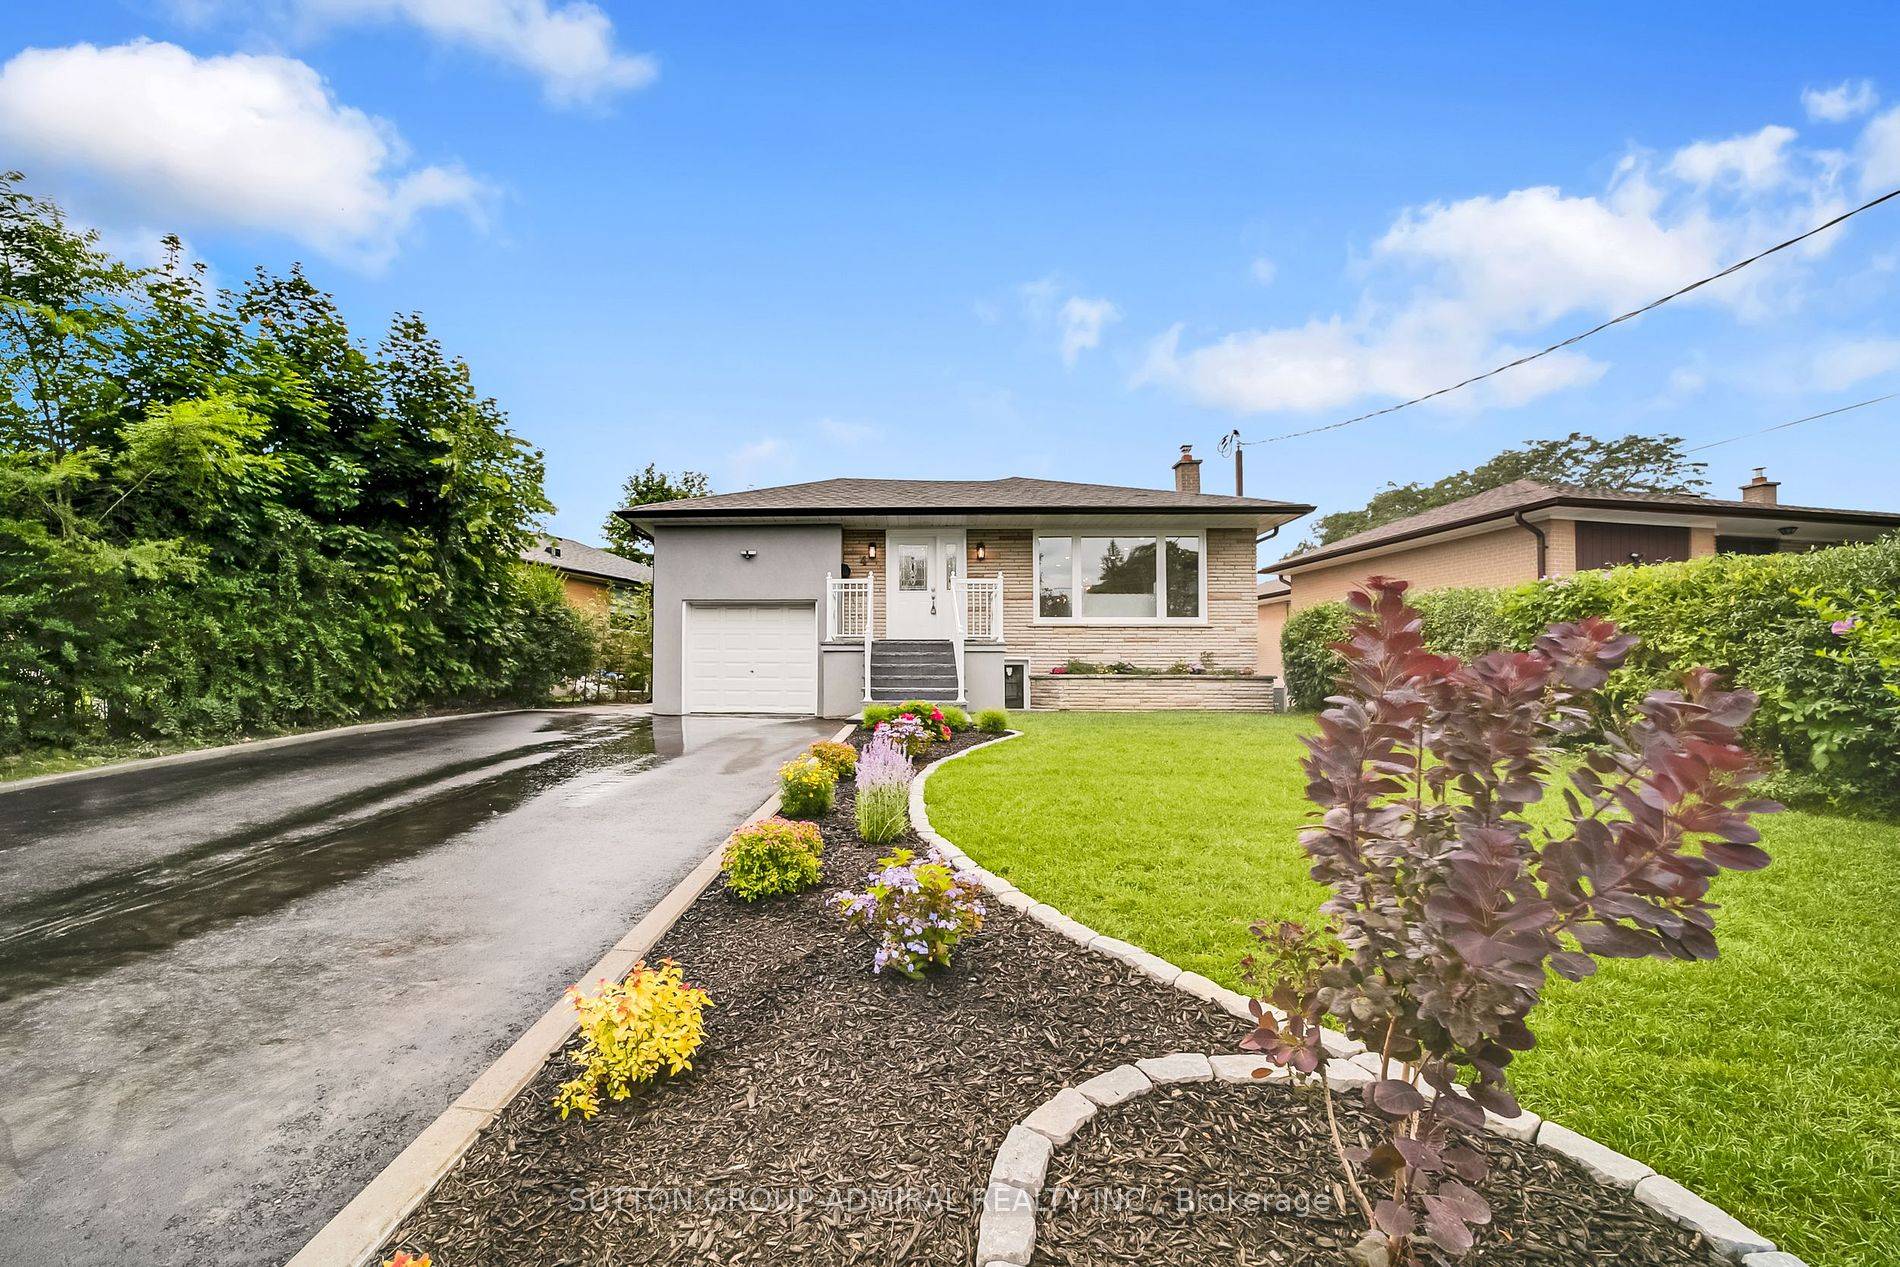 Welcome to this exquisite fully renovated detached bungalow, a true gem in the heart of a desirable neighborhood.